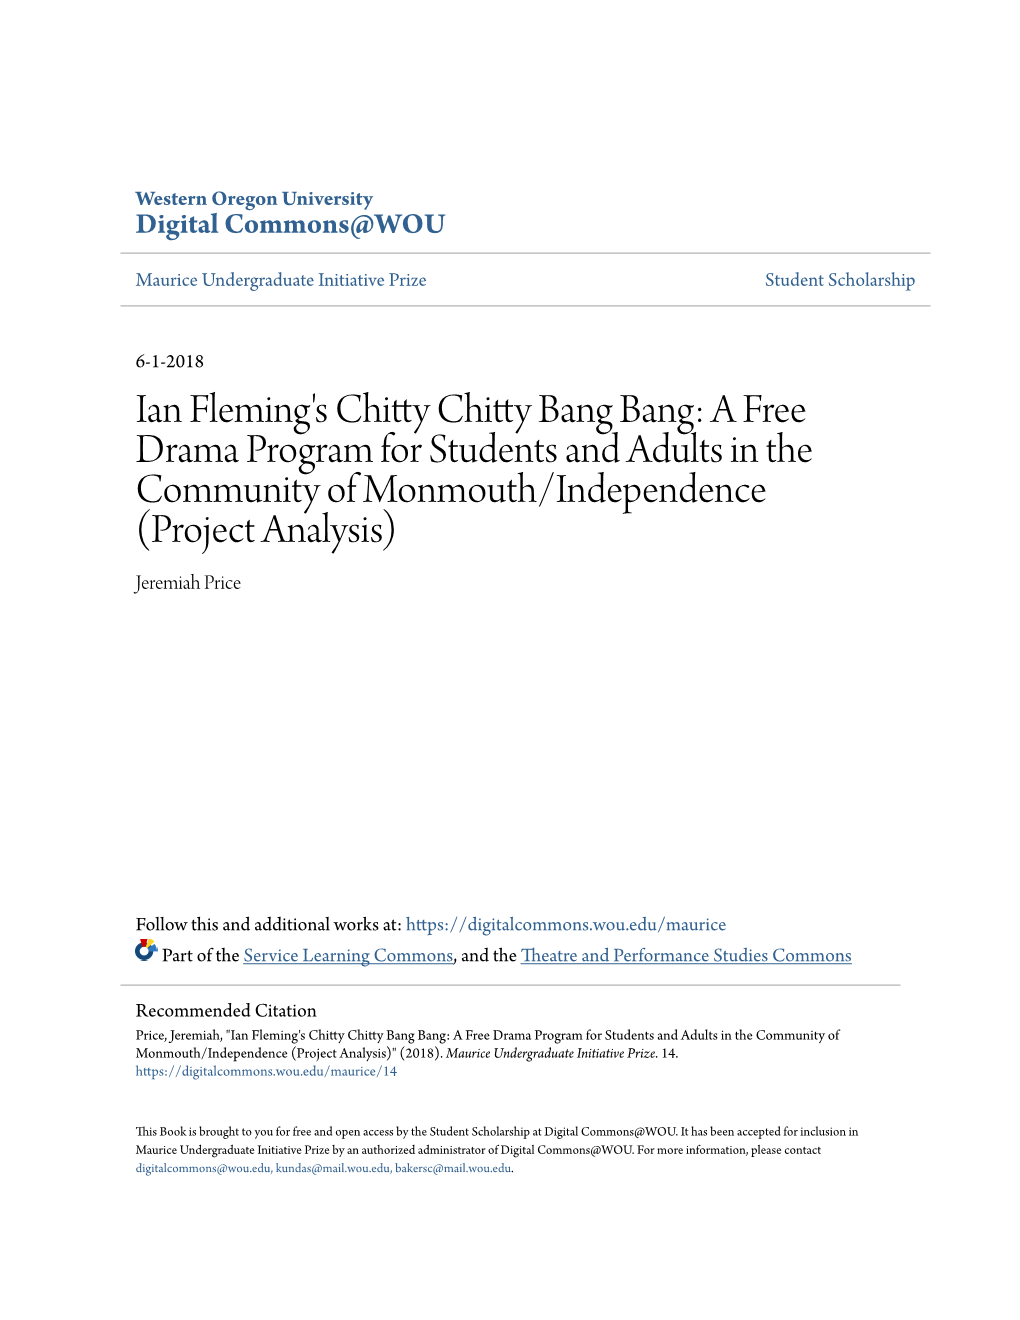 Ian Fleming's Chitty Chitty Bang Bang: a Free Drama Program for Students and Adults in the Community of Monmouth/Independence (Project Analysis) Jeremiah Price